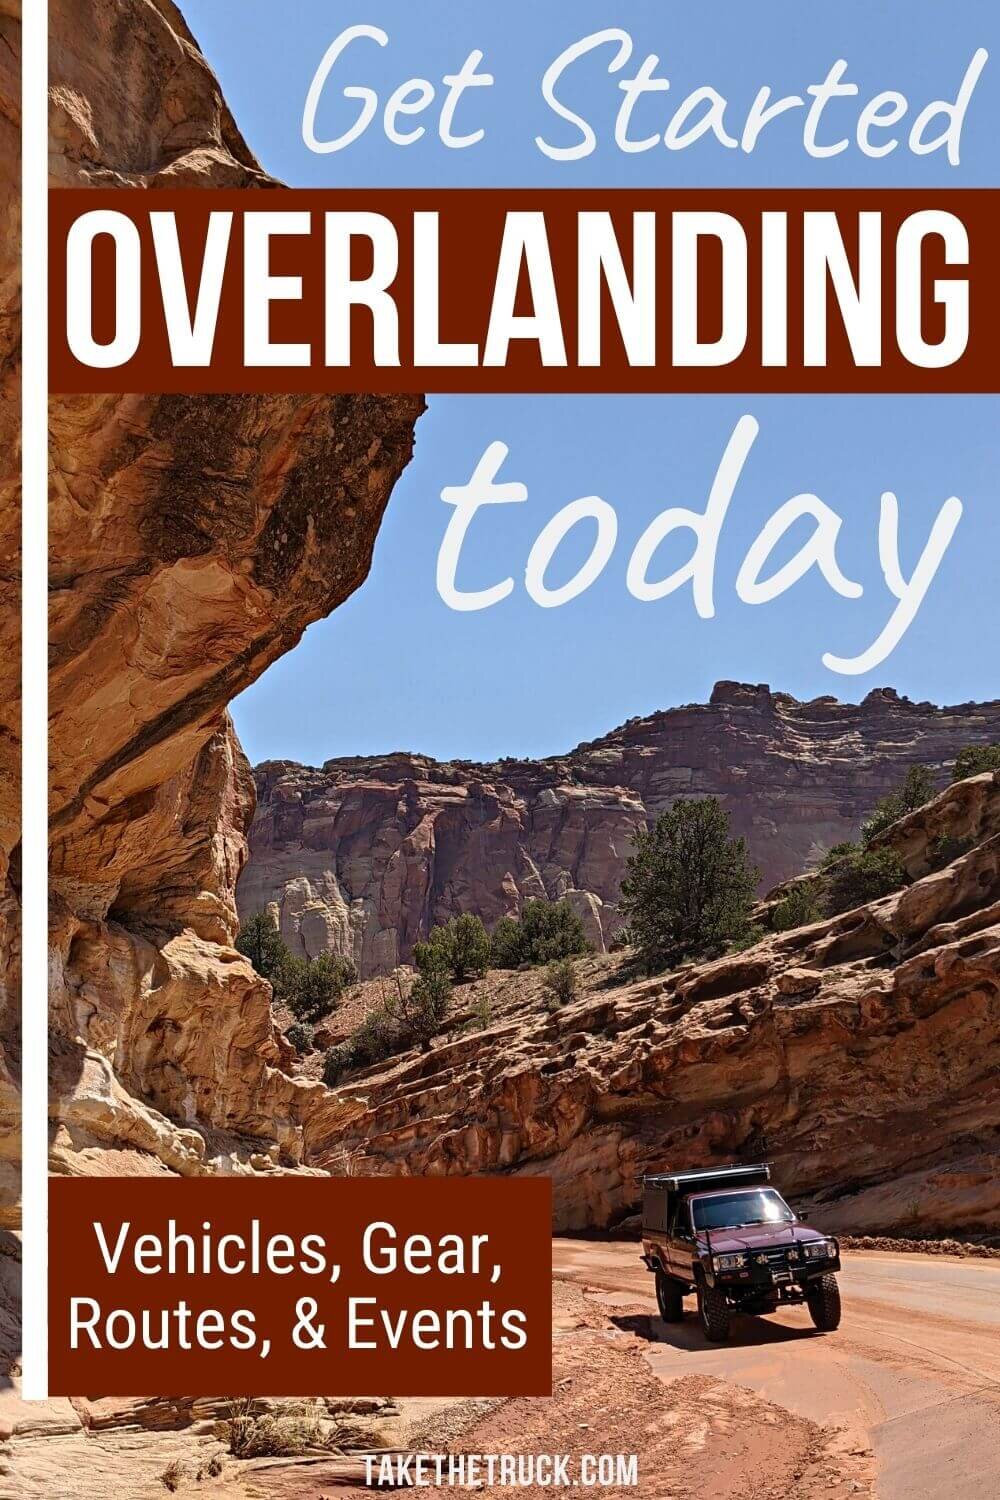 Overlanding &amp; overland travel resource: overlanding for beginners, budget overlanding, overlanding recovery &amp; gear, overland vehicles, overlanding destinations &amp; routes, overlanding tips